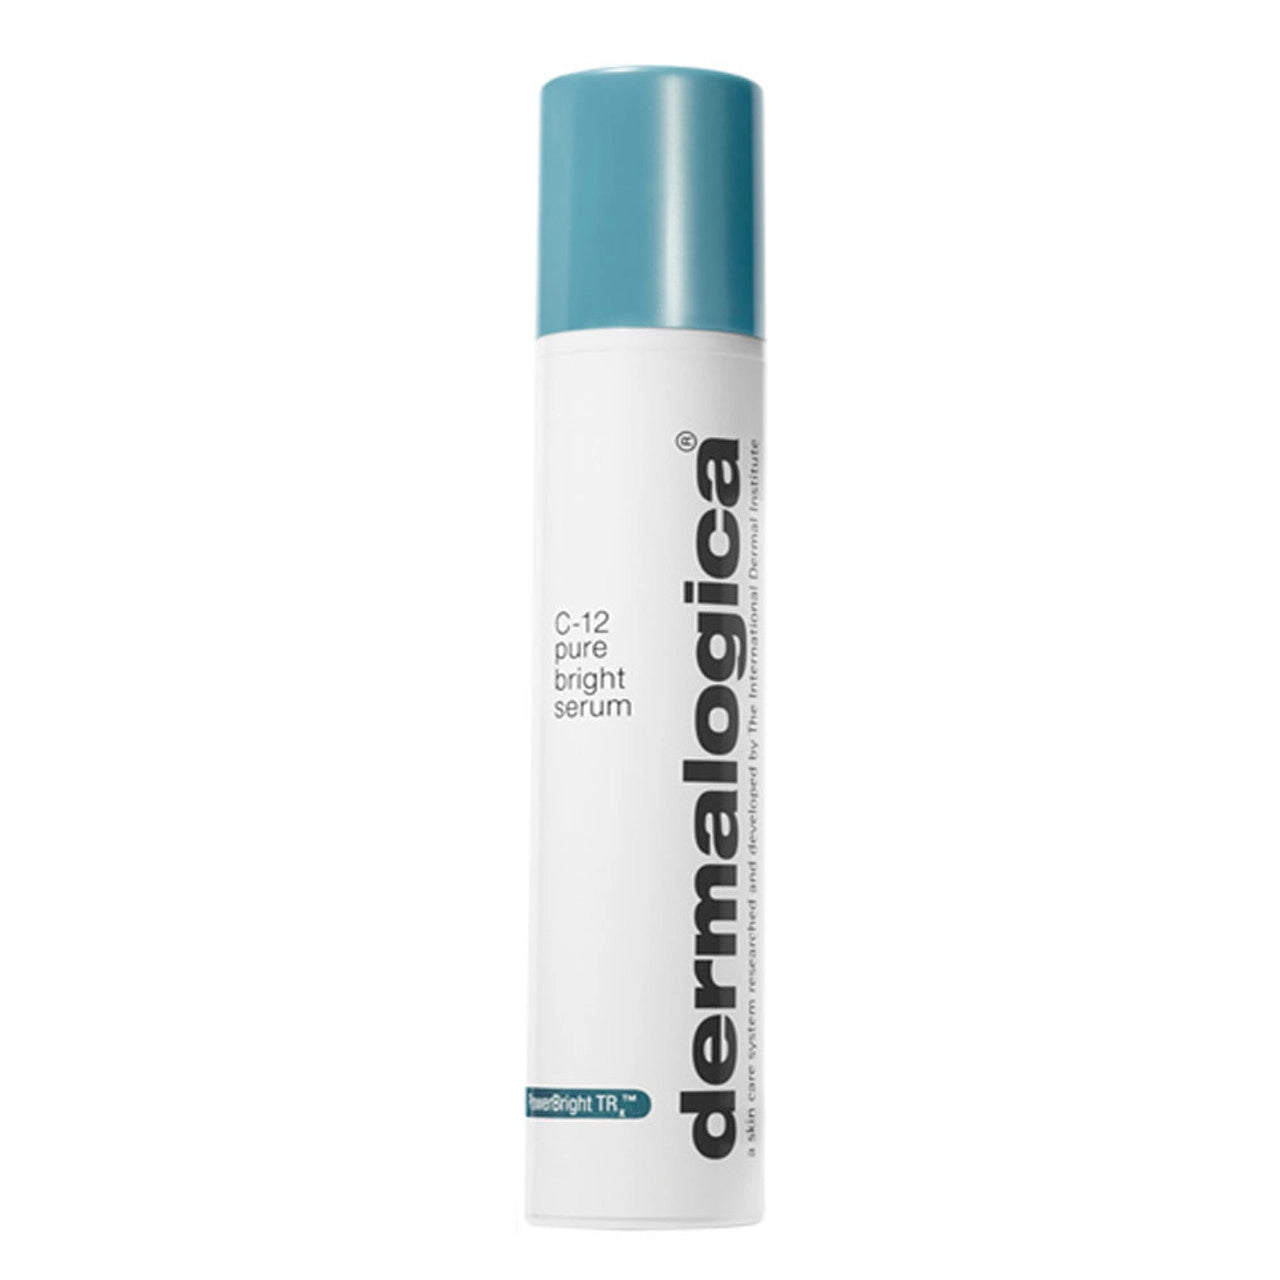 Dermalogica C-12 Pure Bright Serum TaraLyons.ie Serums and Boosters (6630017695922)